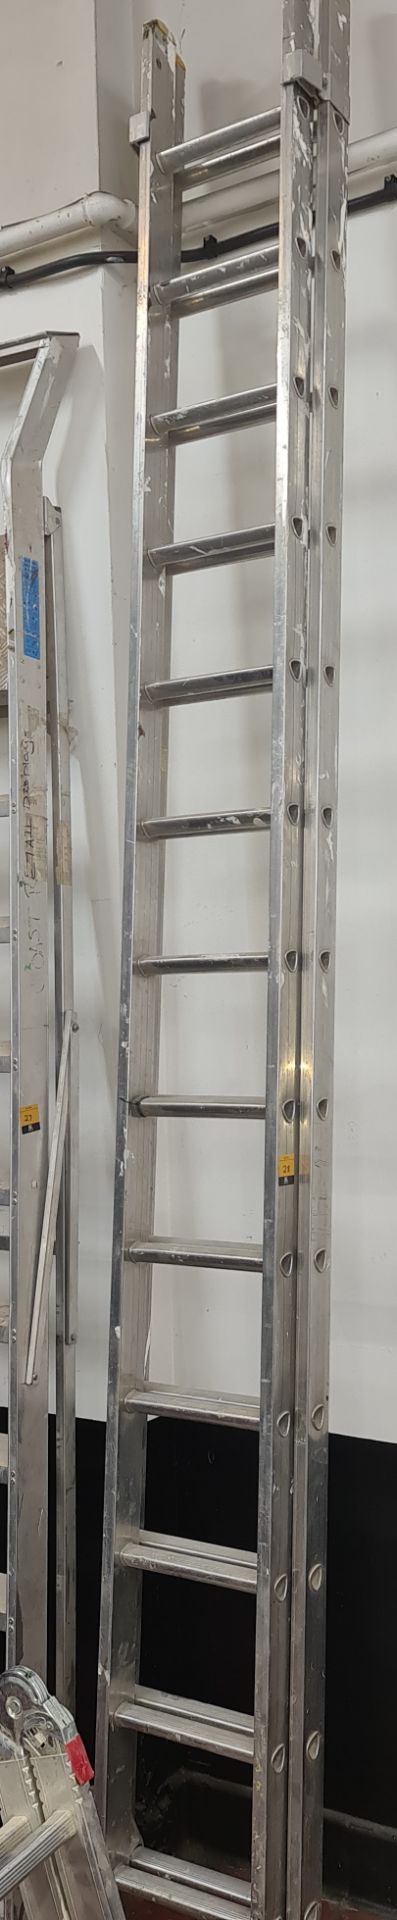 Set of double rung ladders, each length measuring approx. 11.5ft